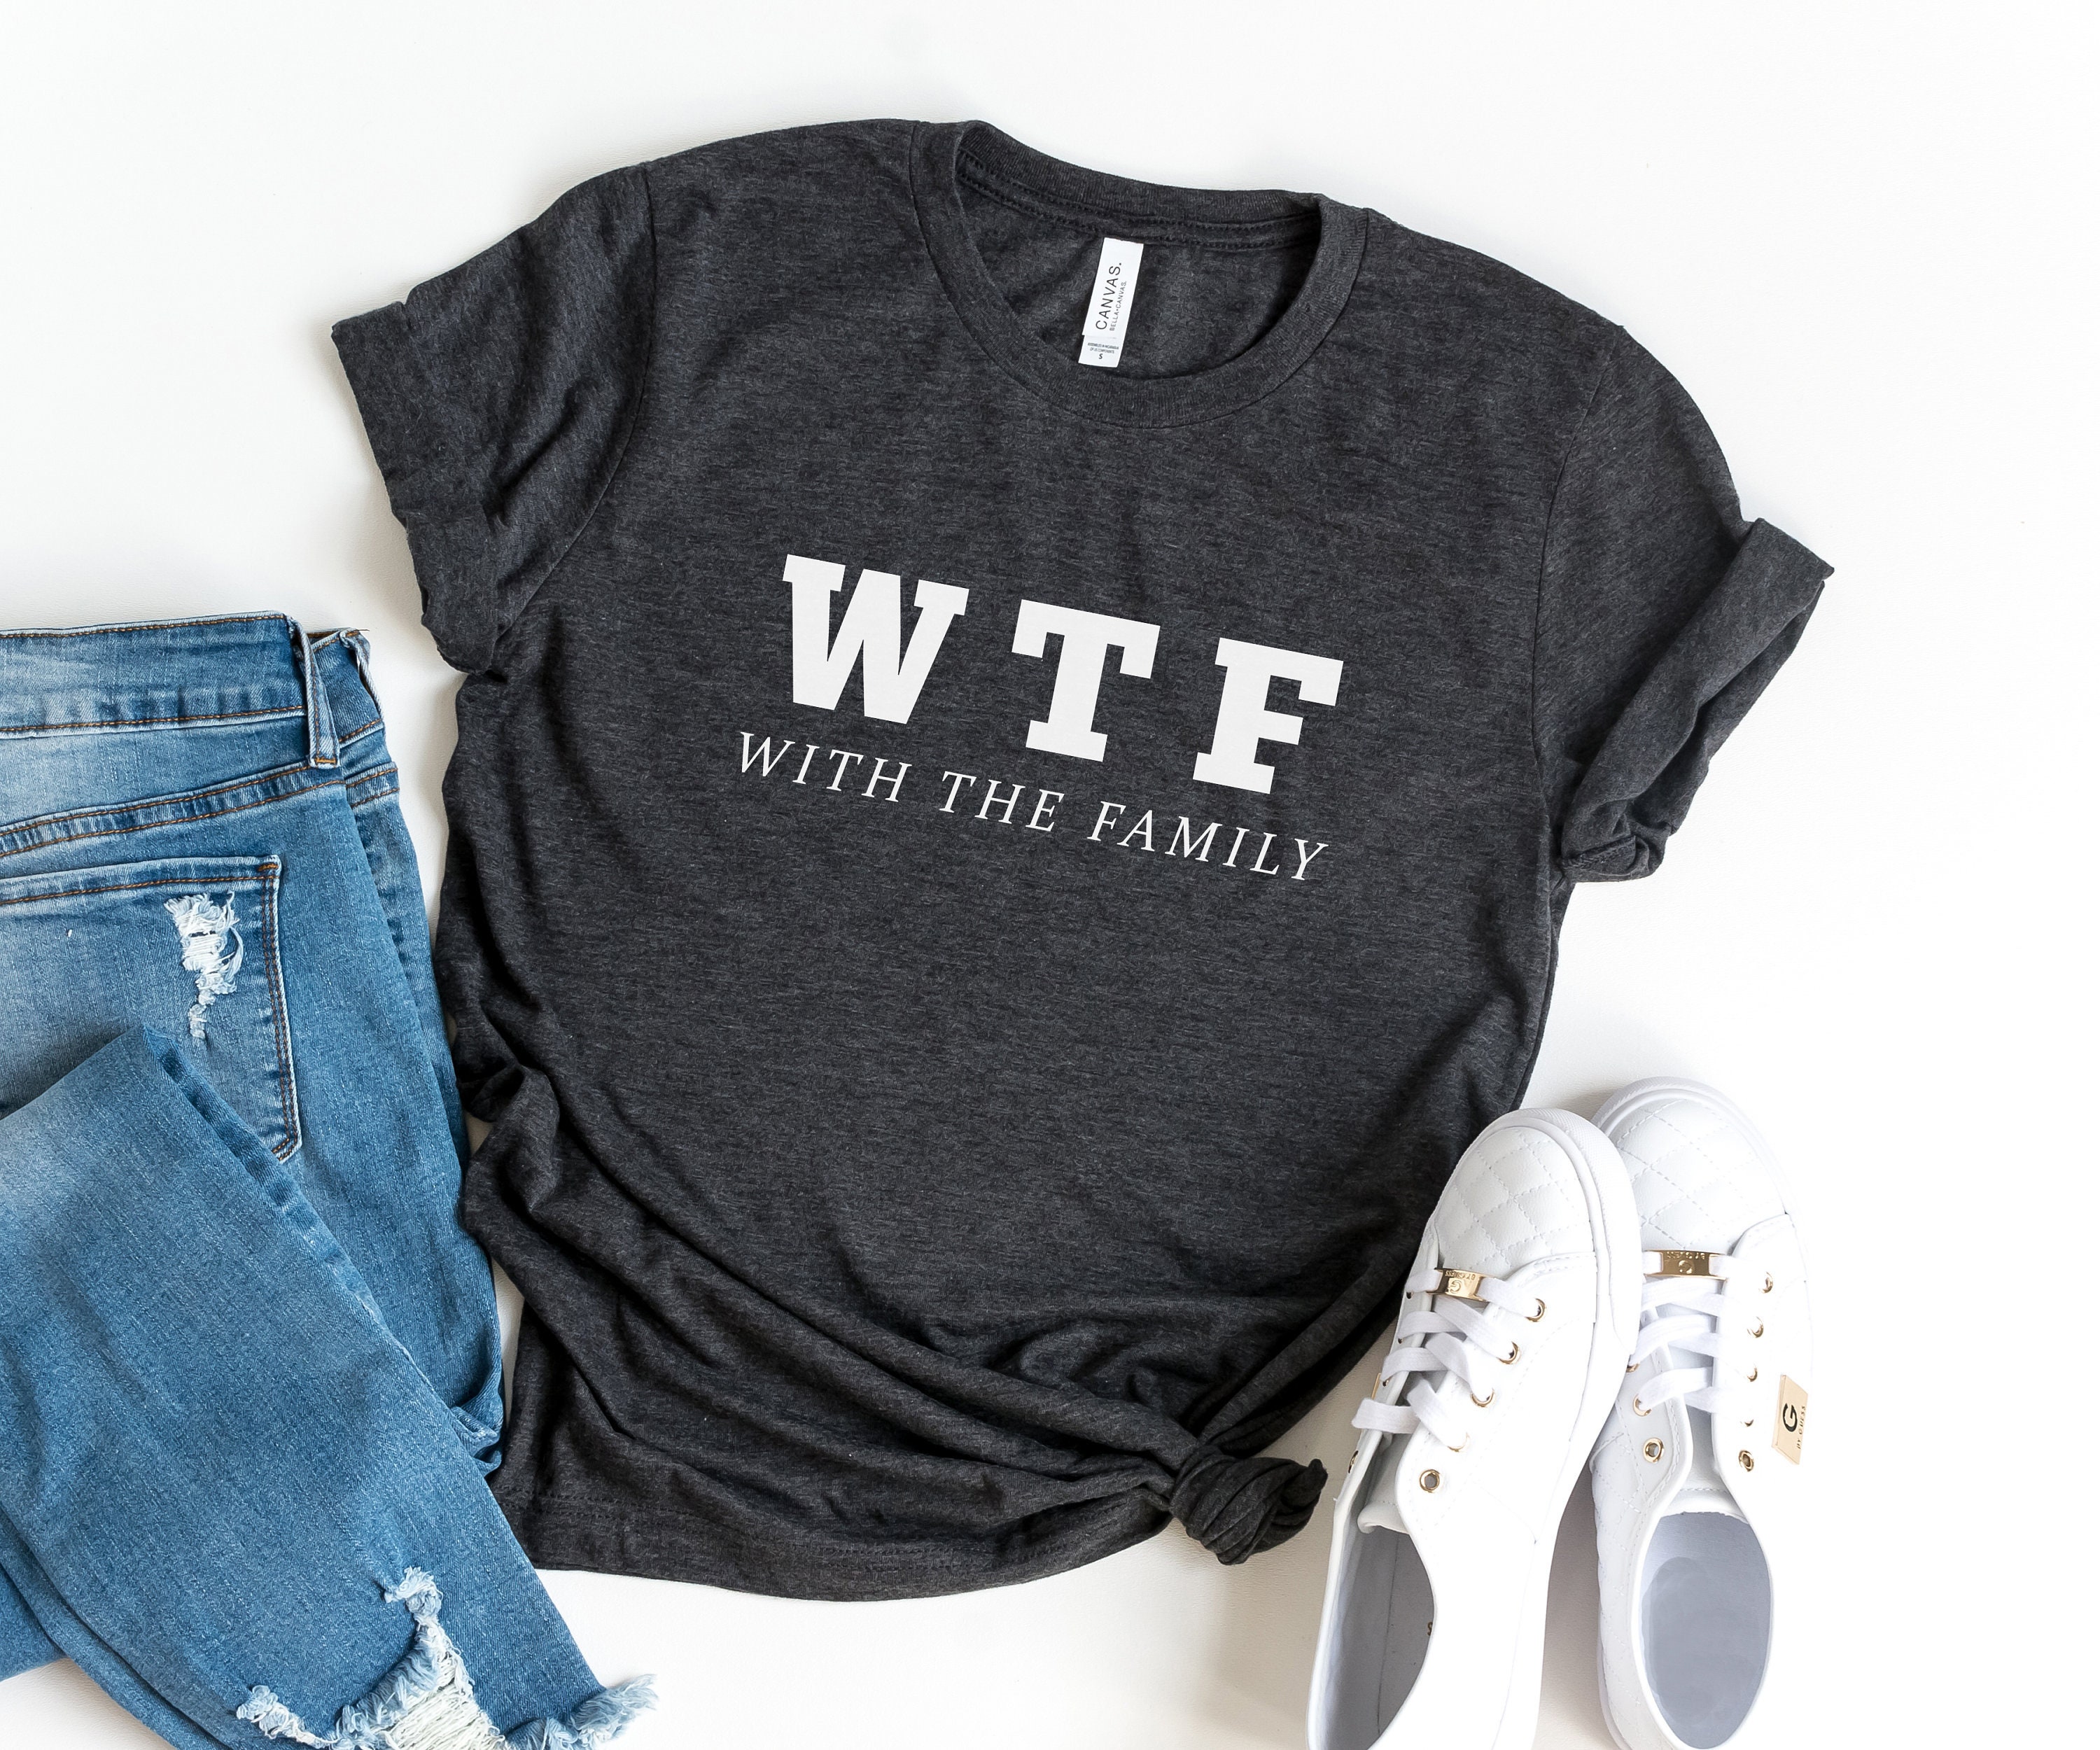 WTF with family reunion shirts funny tshirts for women shirt | Etsy